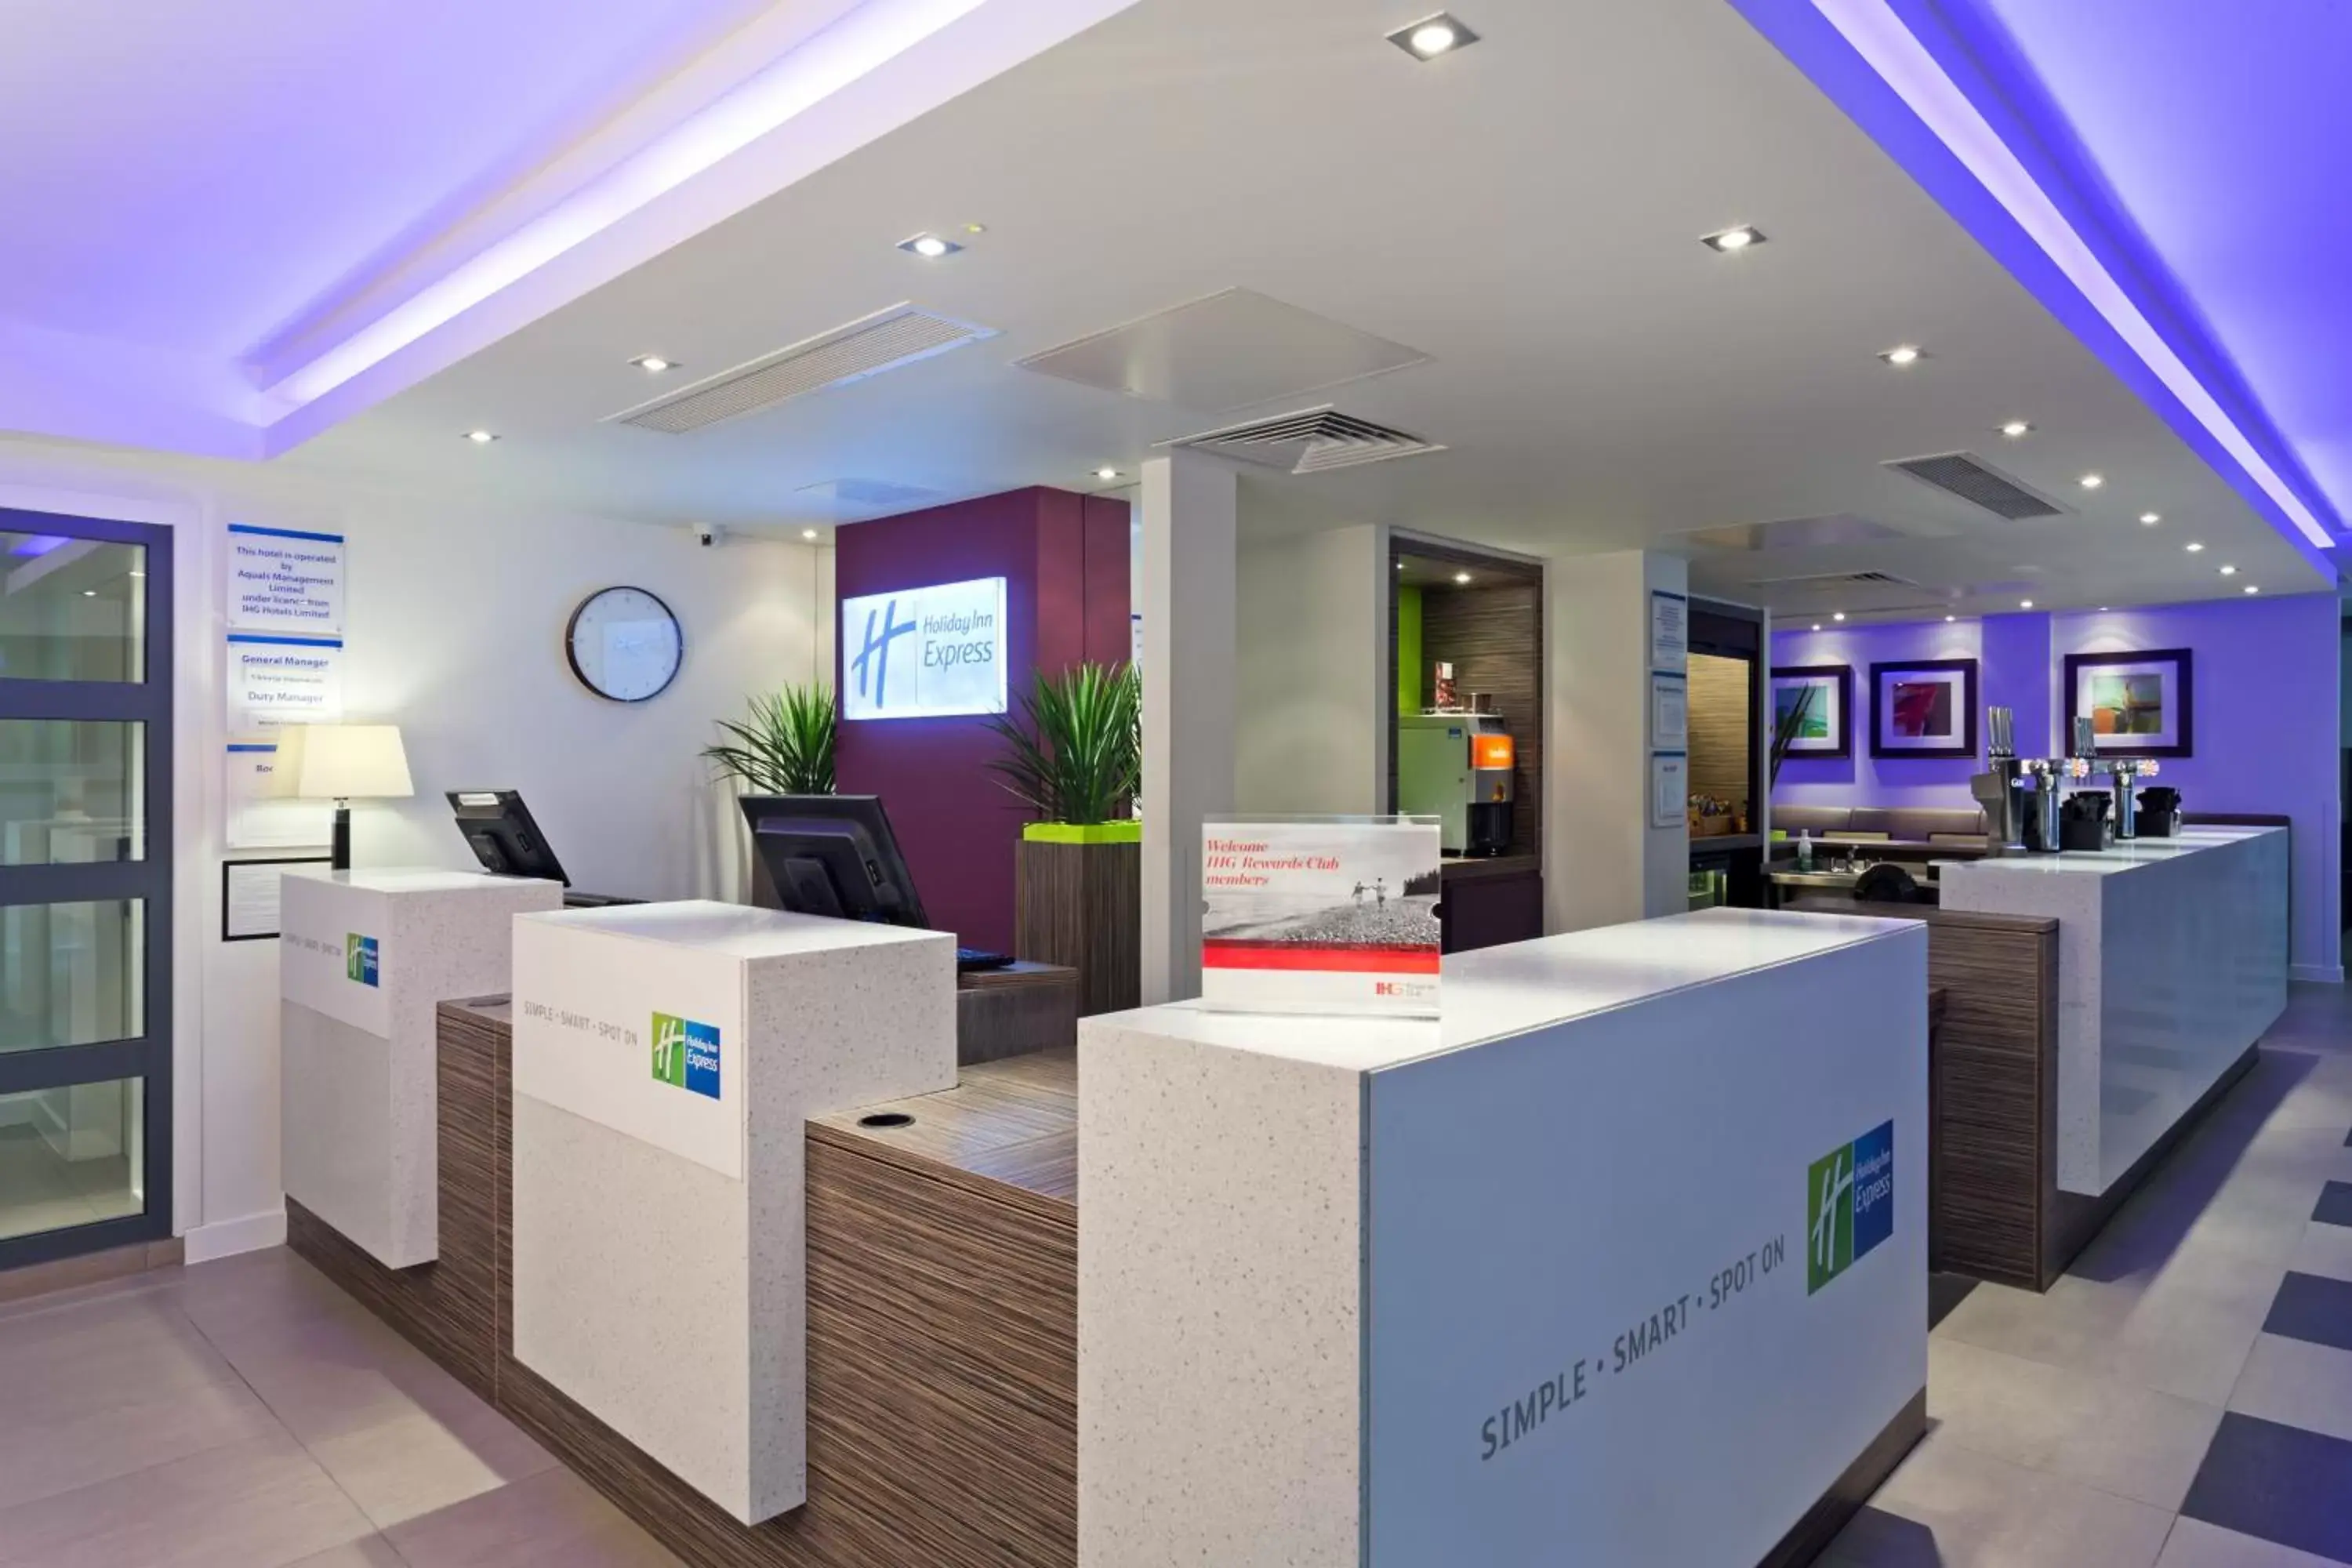 Property building, Lobby/Reception in Holiday Inn Express Harlow, an IHG Hotel